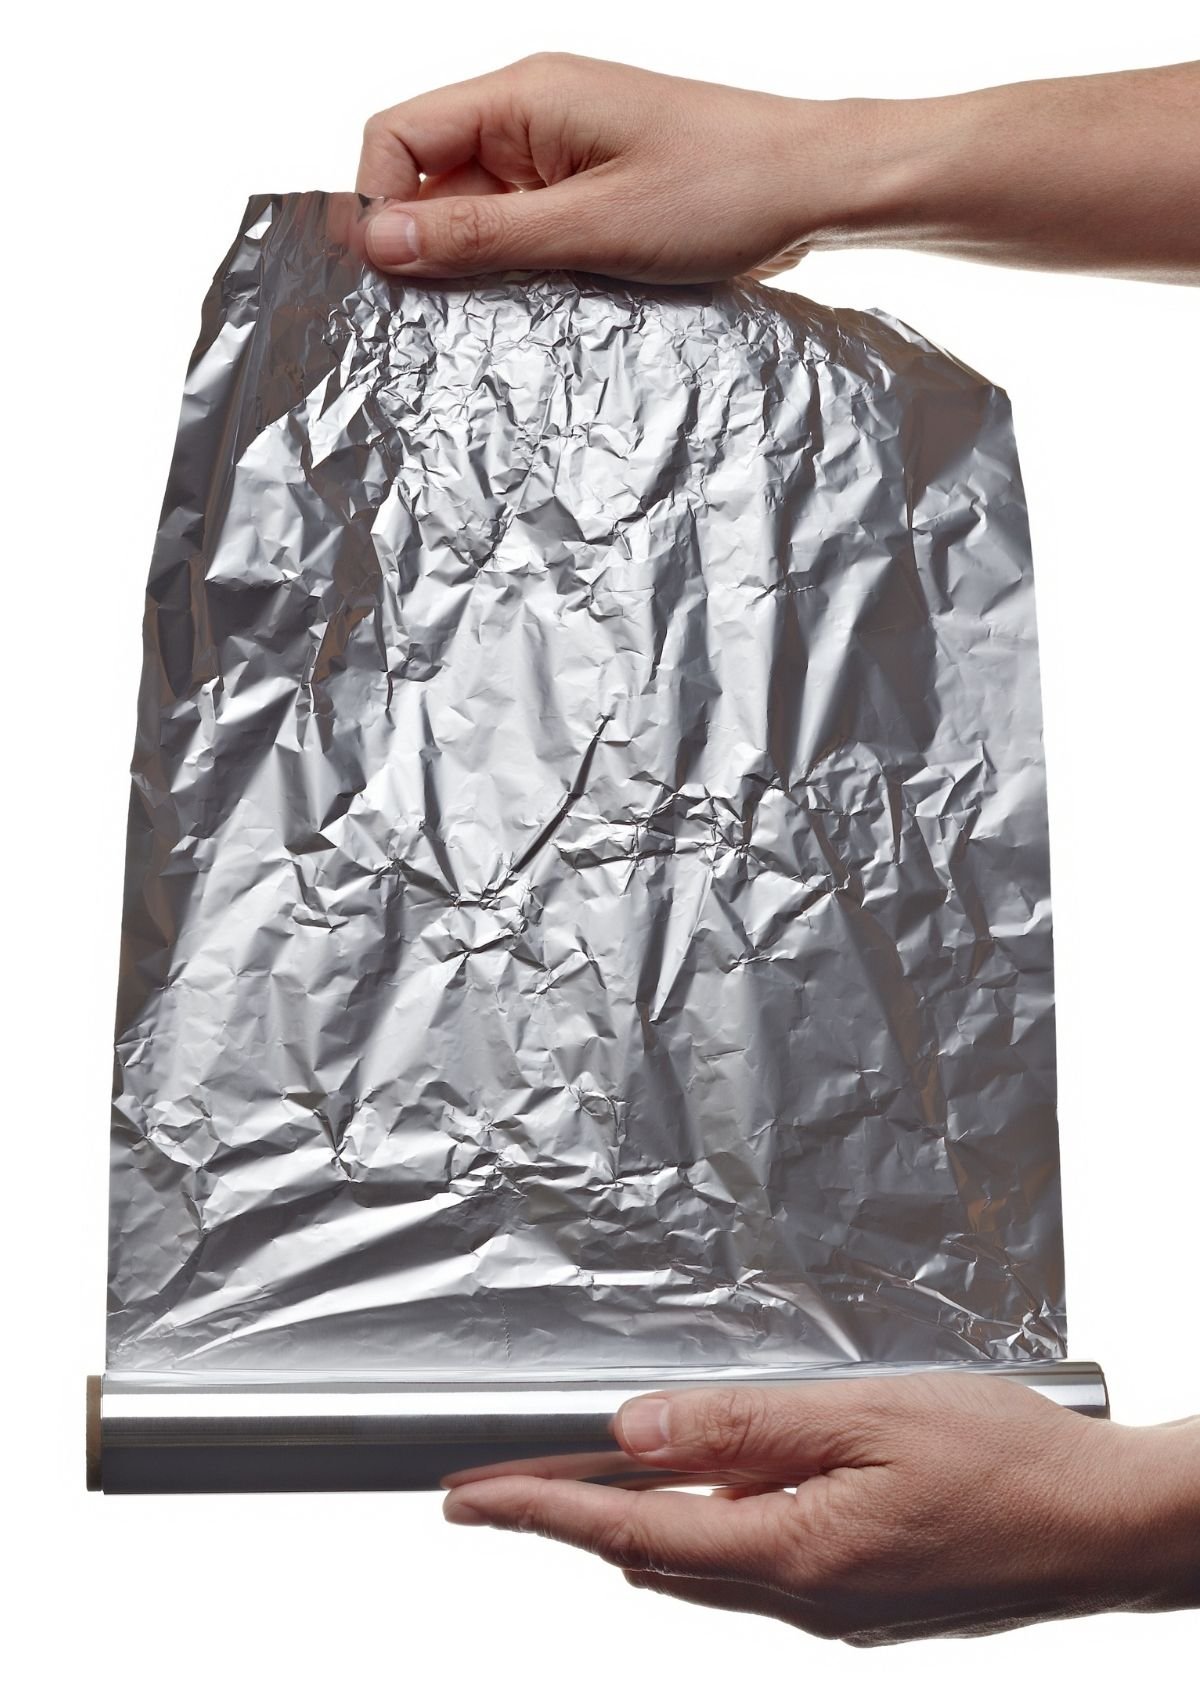 5 Ways to Use Aluminum Foil to Clean Your Kitchen